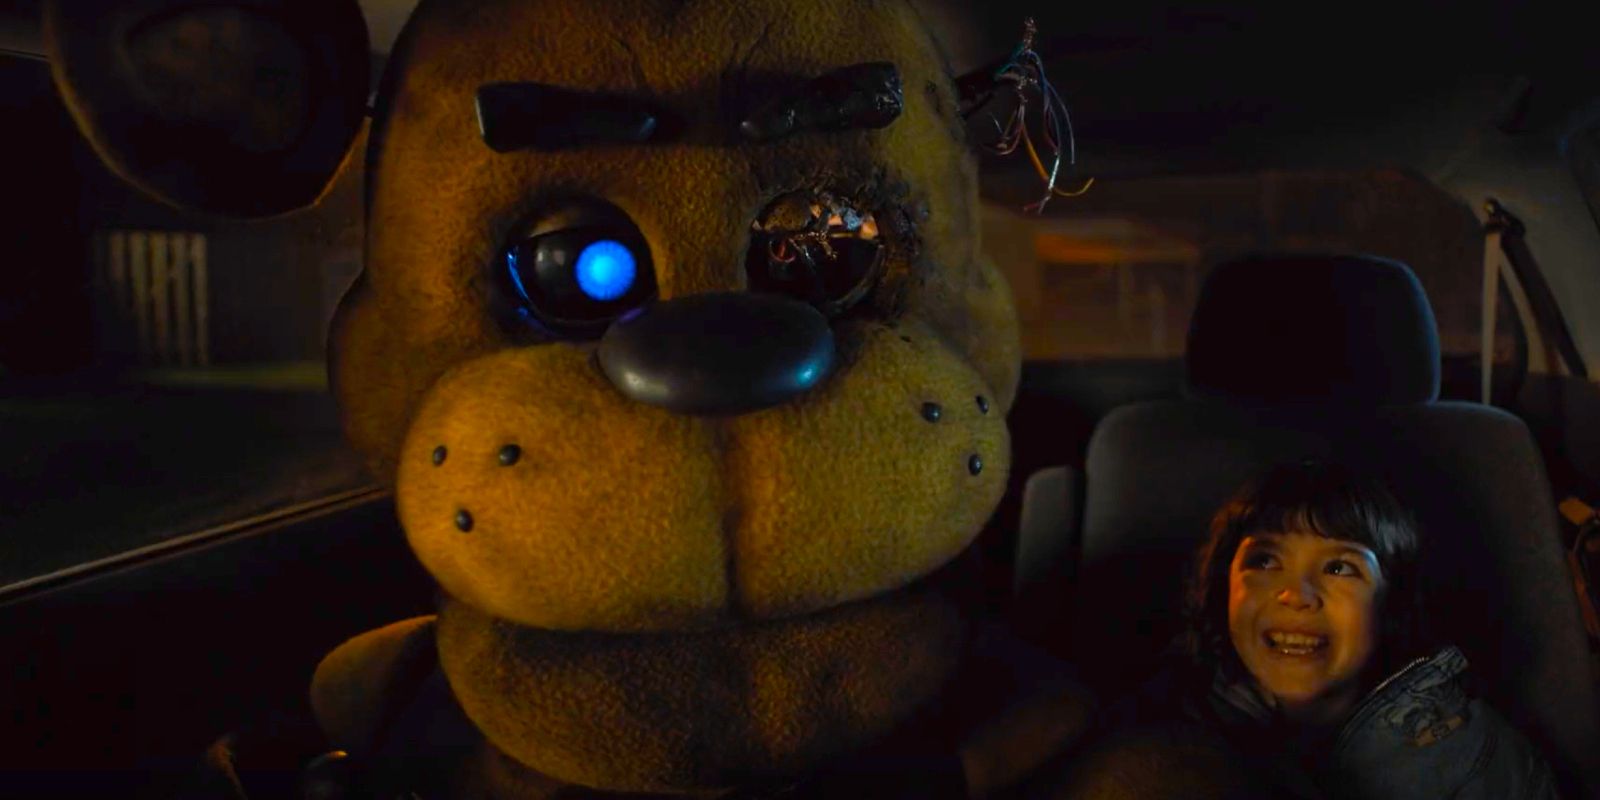 Golden Freddy sitting next to a smiling Abby in Five Nights at Freddy's movie